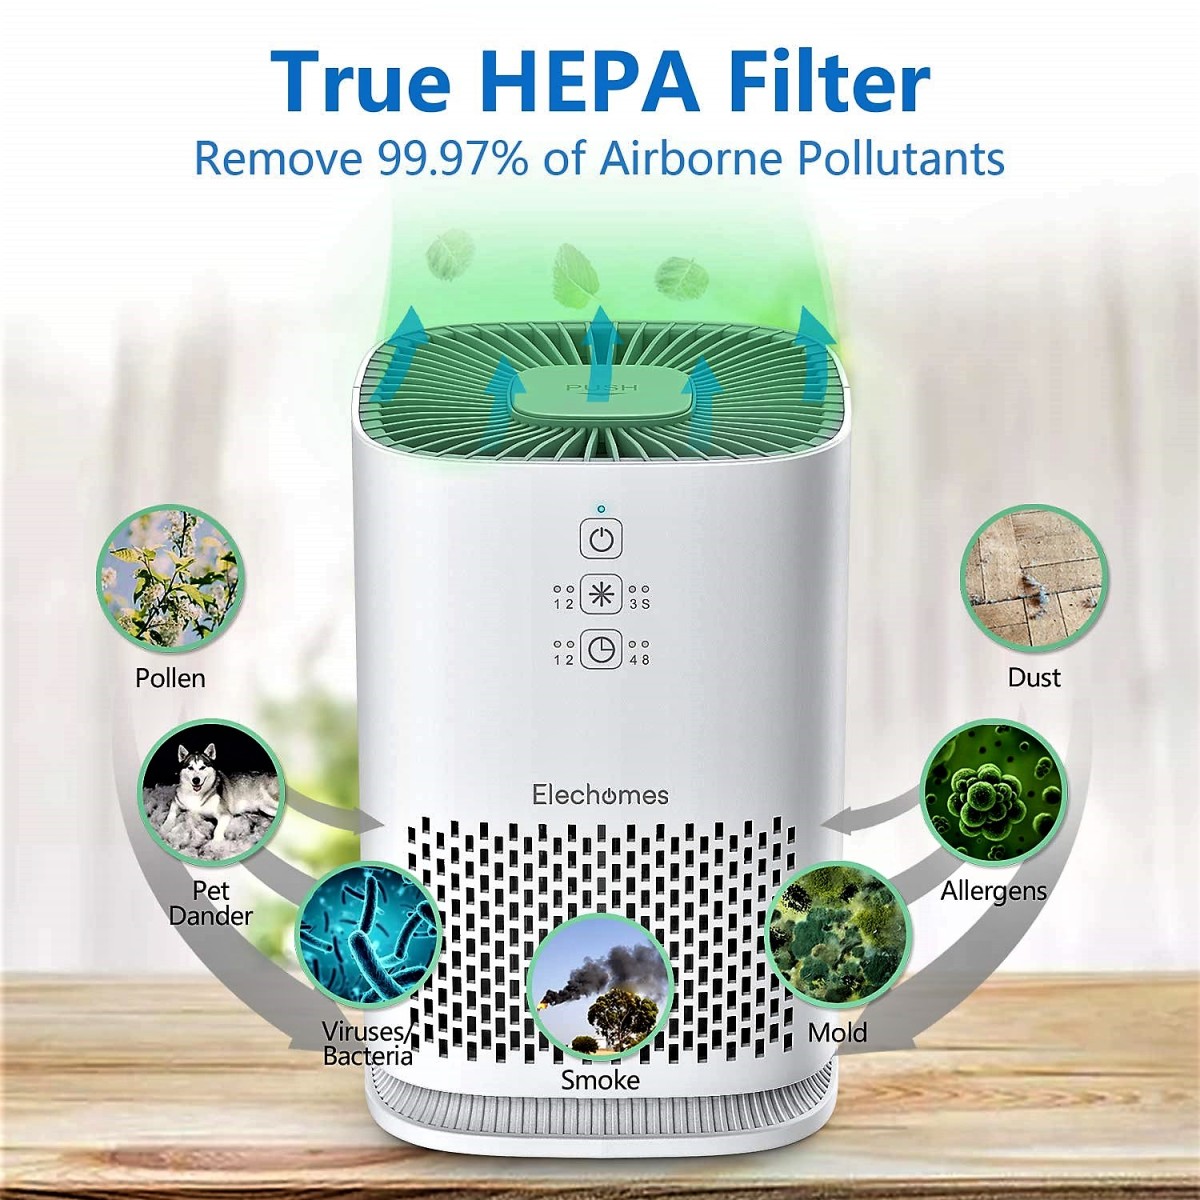 The HEPA filter in this system will remove many types of pollutants.